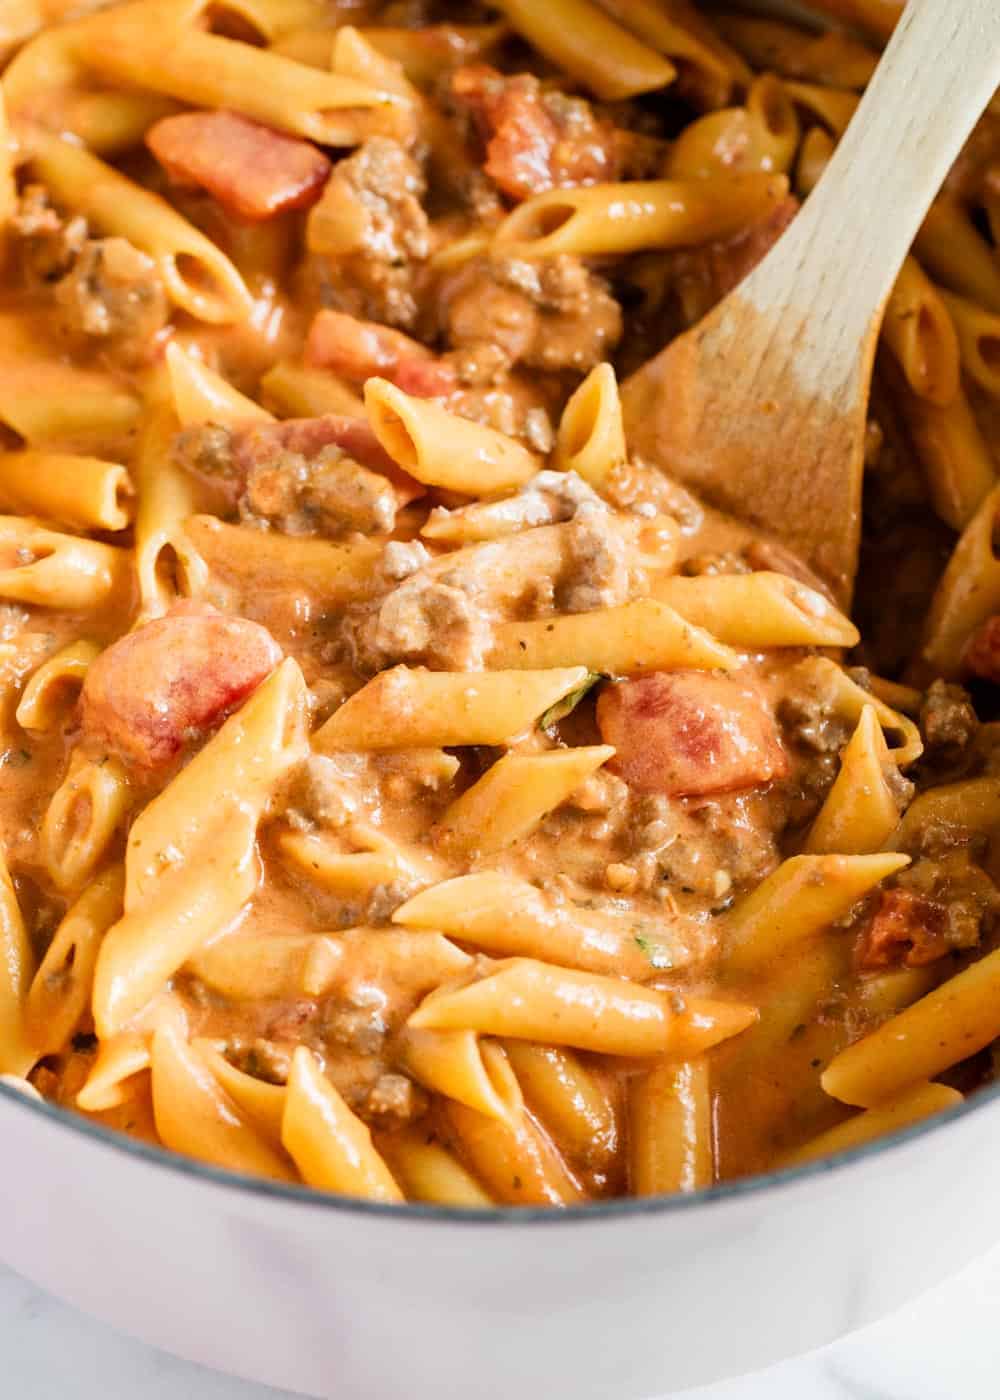 Ziti pasta in pot with wooden spoon.